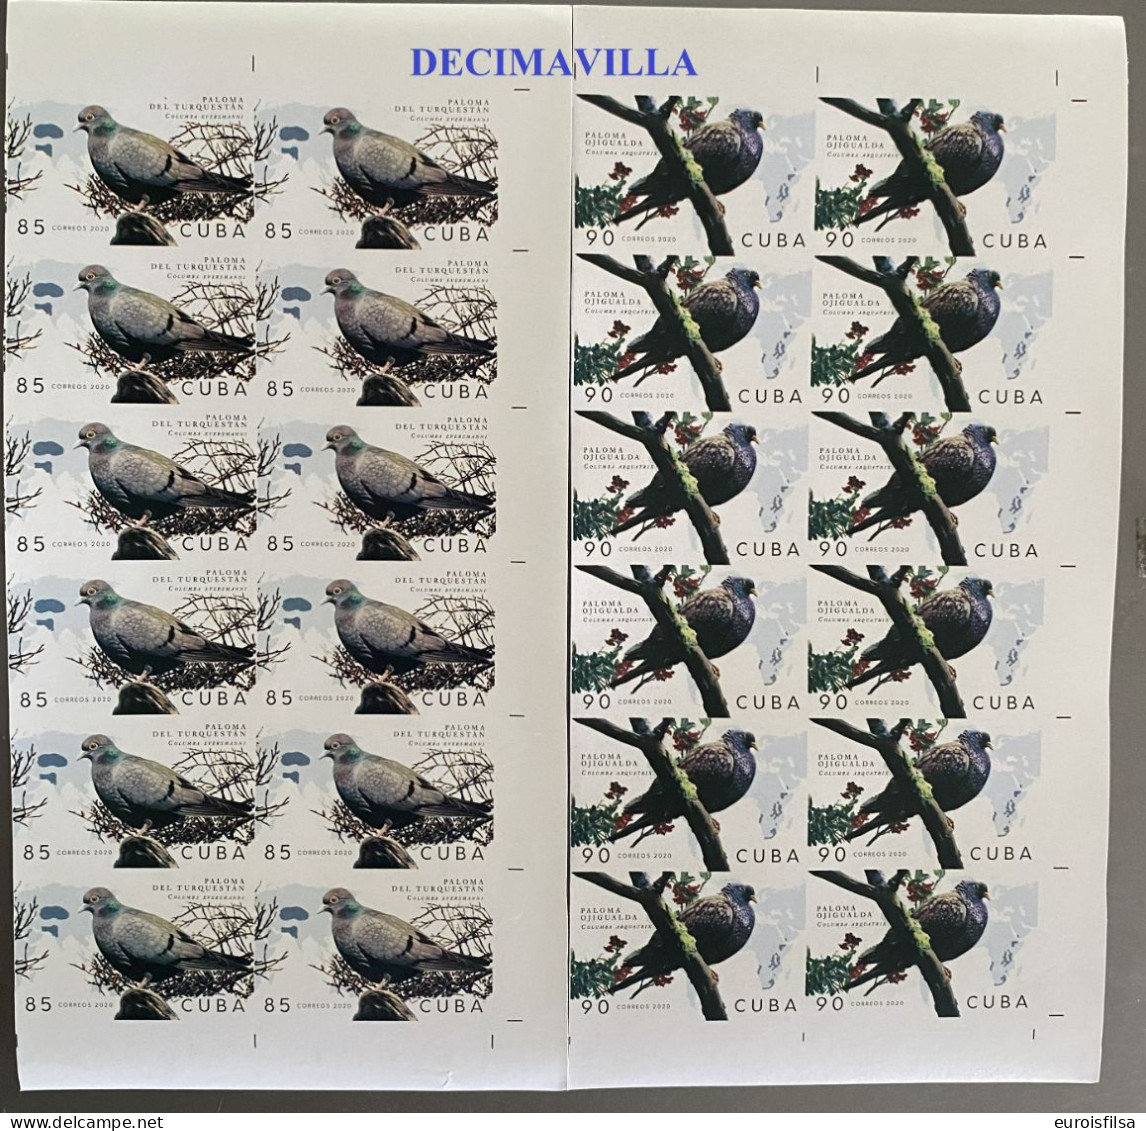 CUBA, 2020-14, AVES, PALOMAS, SIN DENTAR, IMPERFORATED. BLQ. 12 - Imperforates, Proofs & Errors